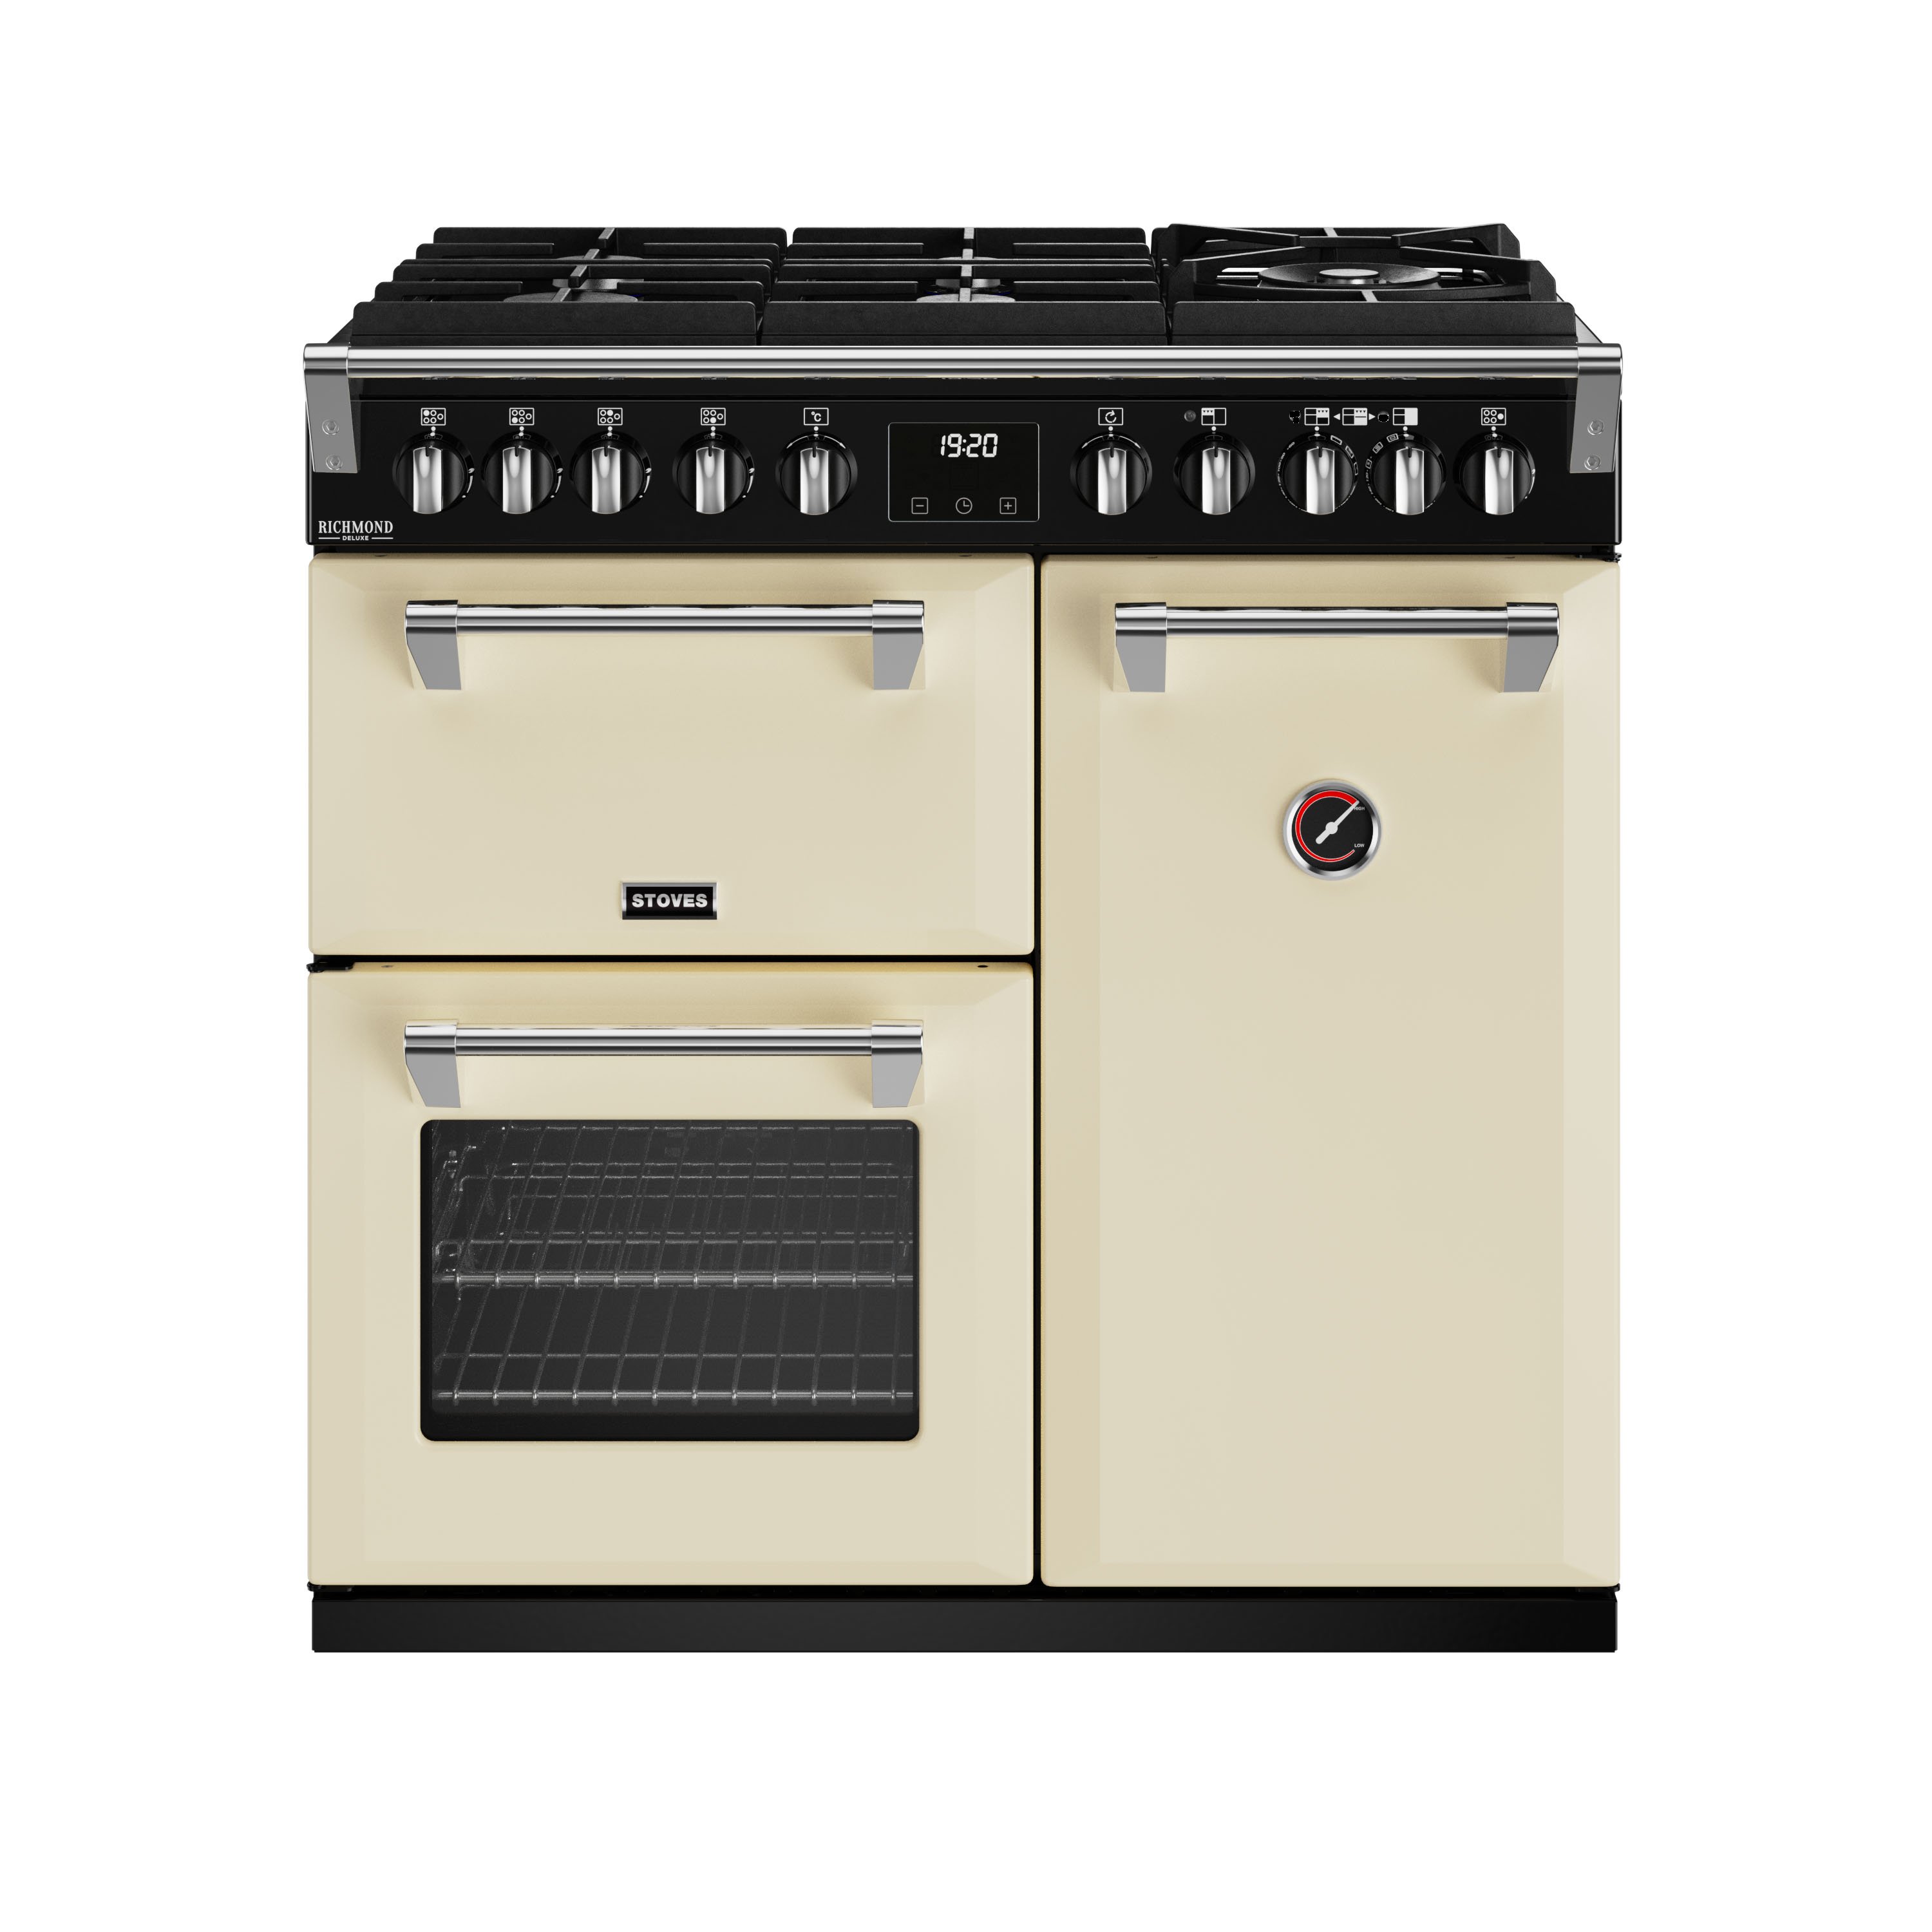 90cm dual fuel range cooker with a 5 burner Gas-Through-Glass hob, conventional oven & grill, multifunction main oven with TrueTemp digital thermostat, and tall fanned oven with PROFLEX™